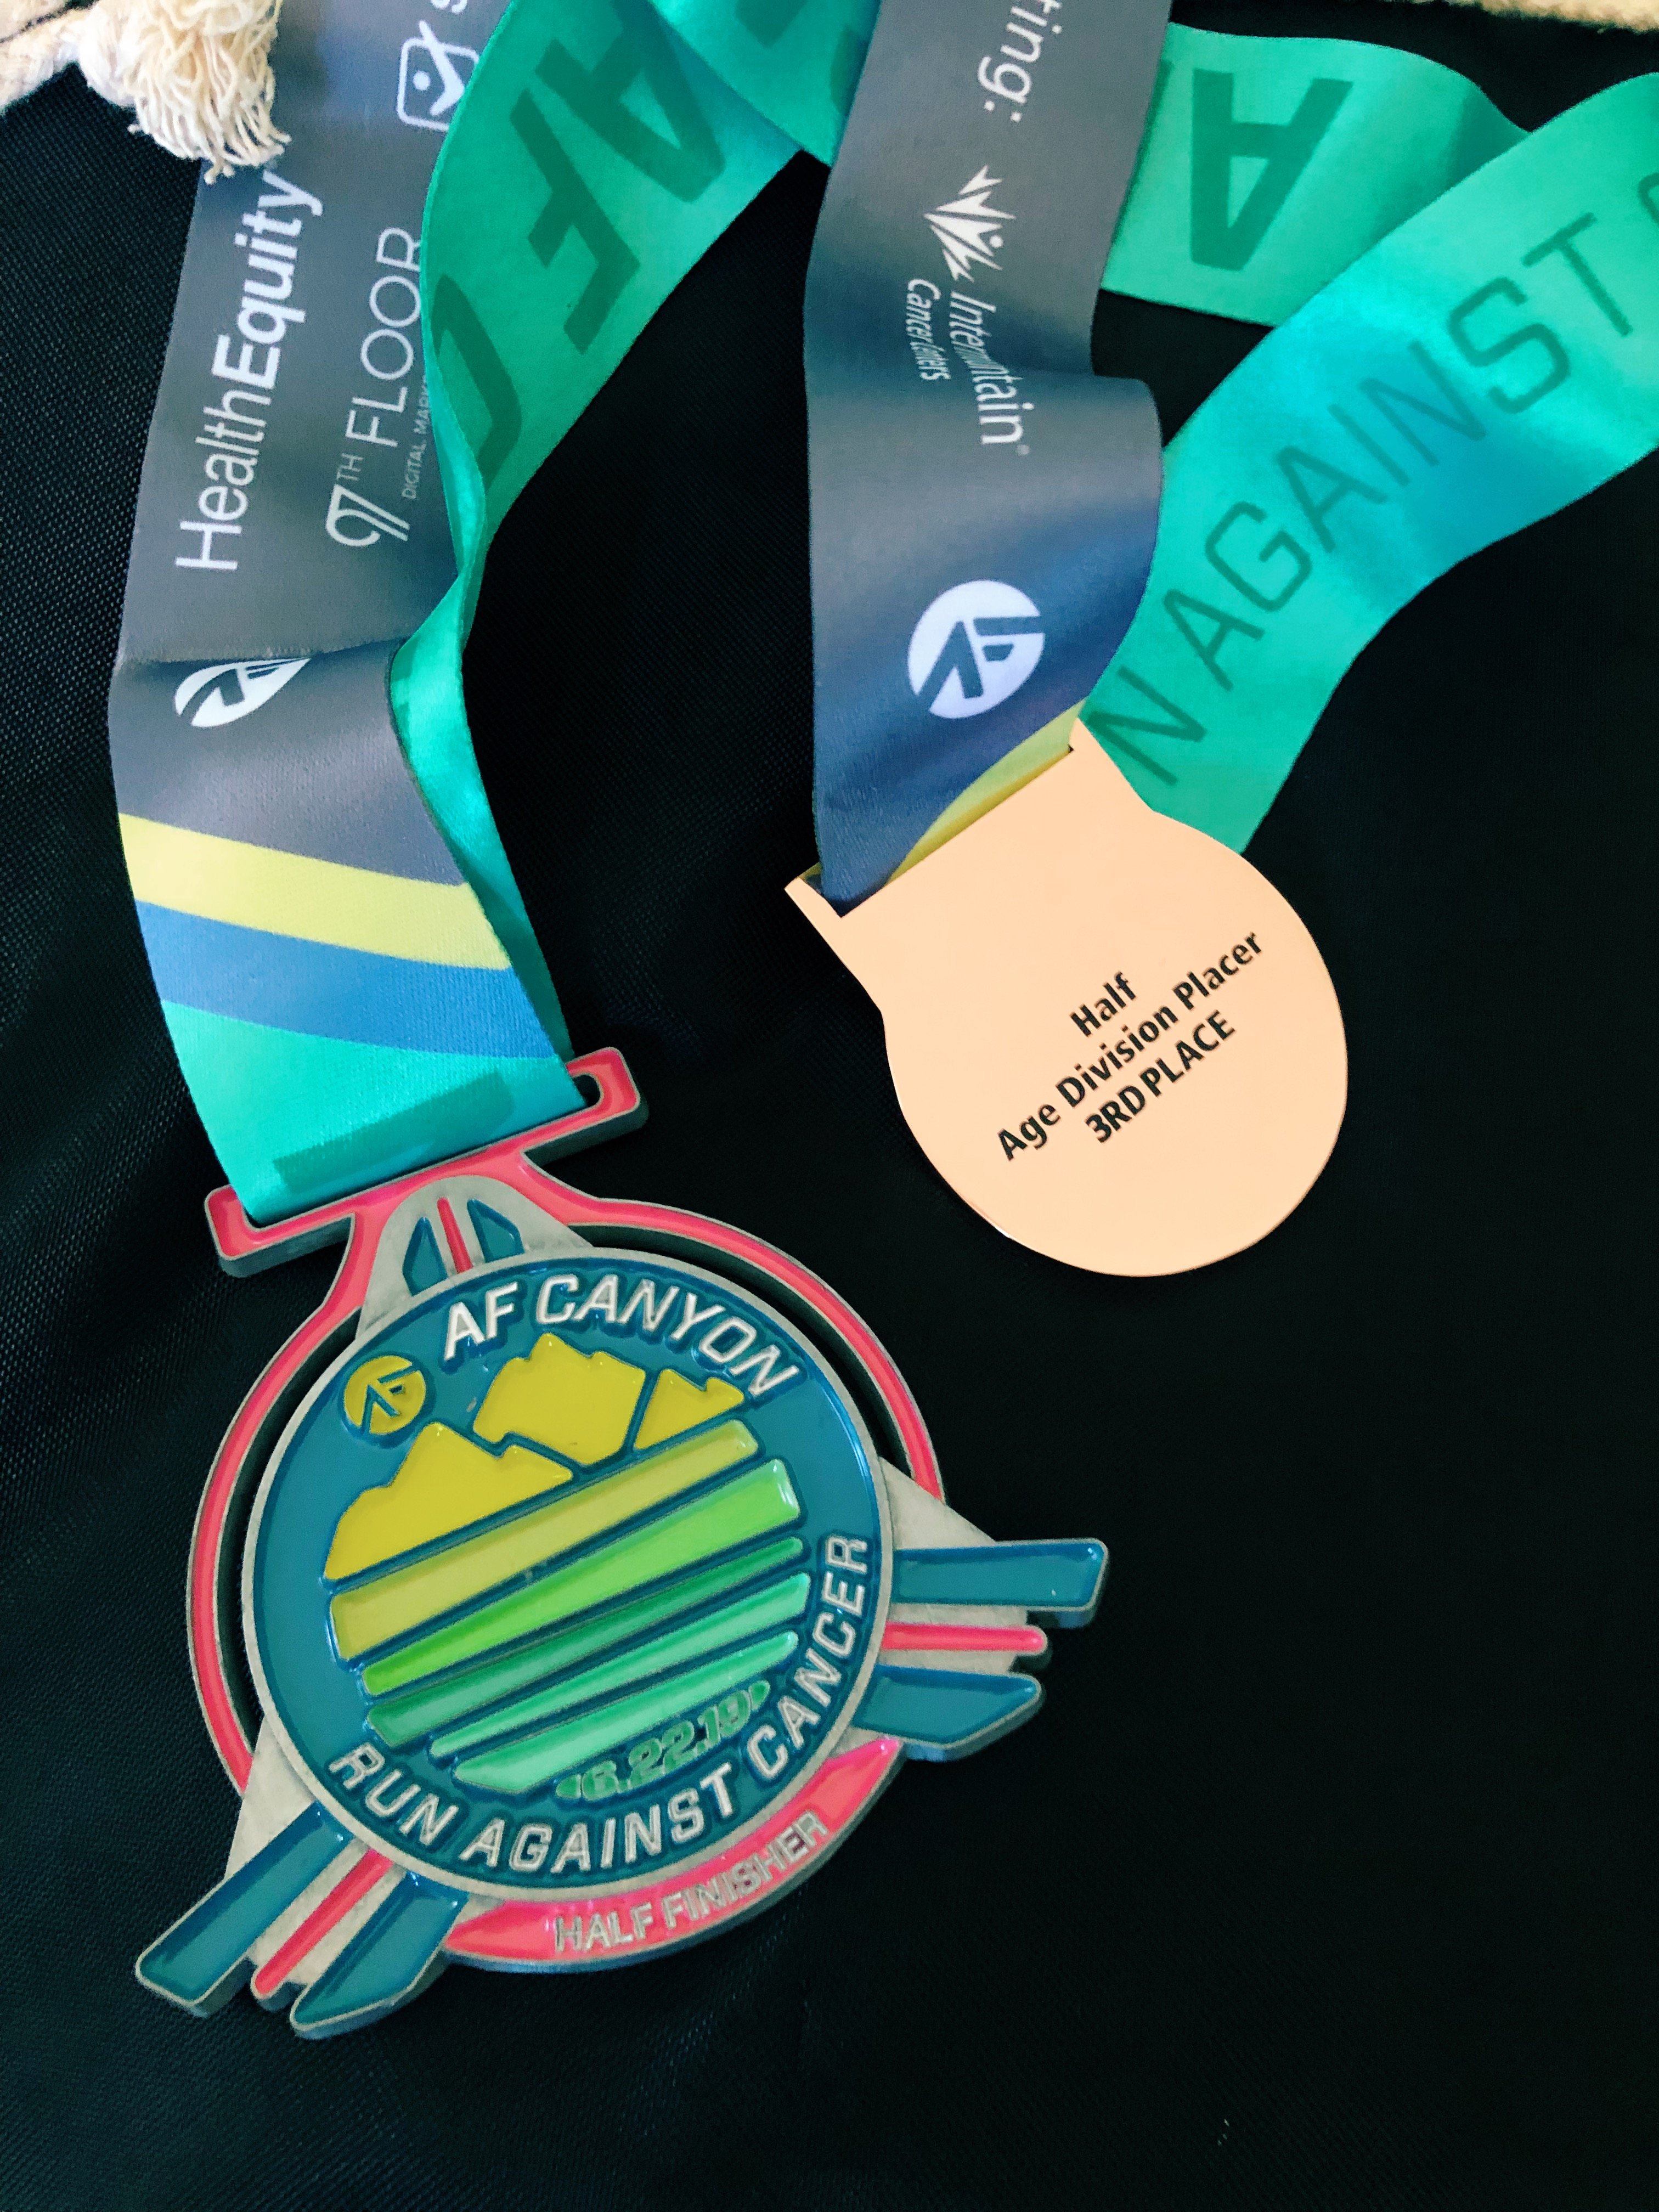 af canyon run medals